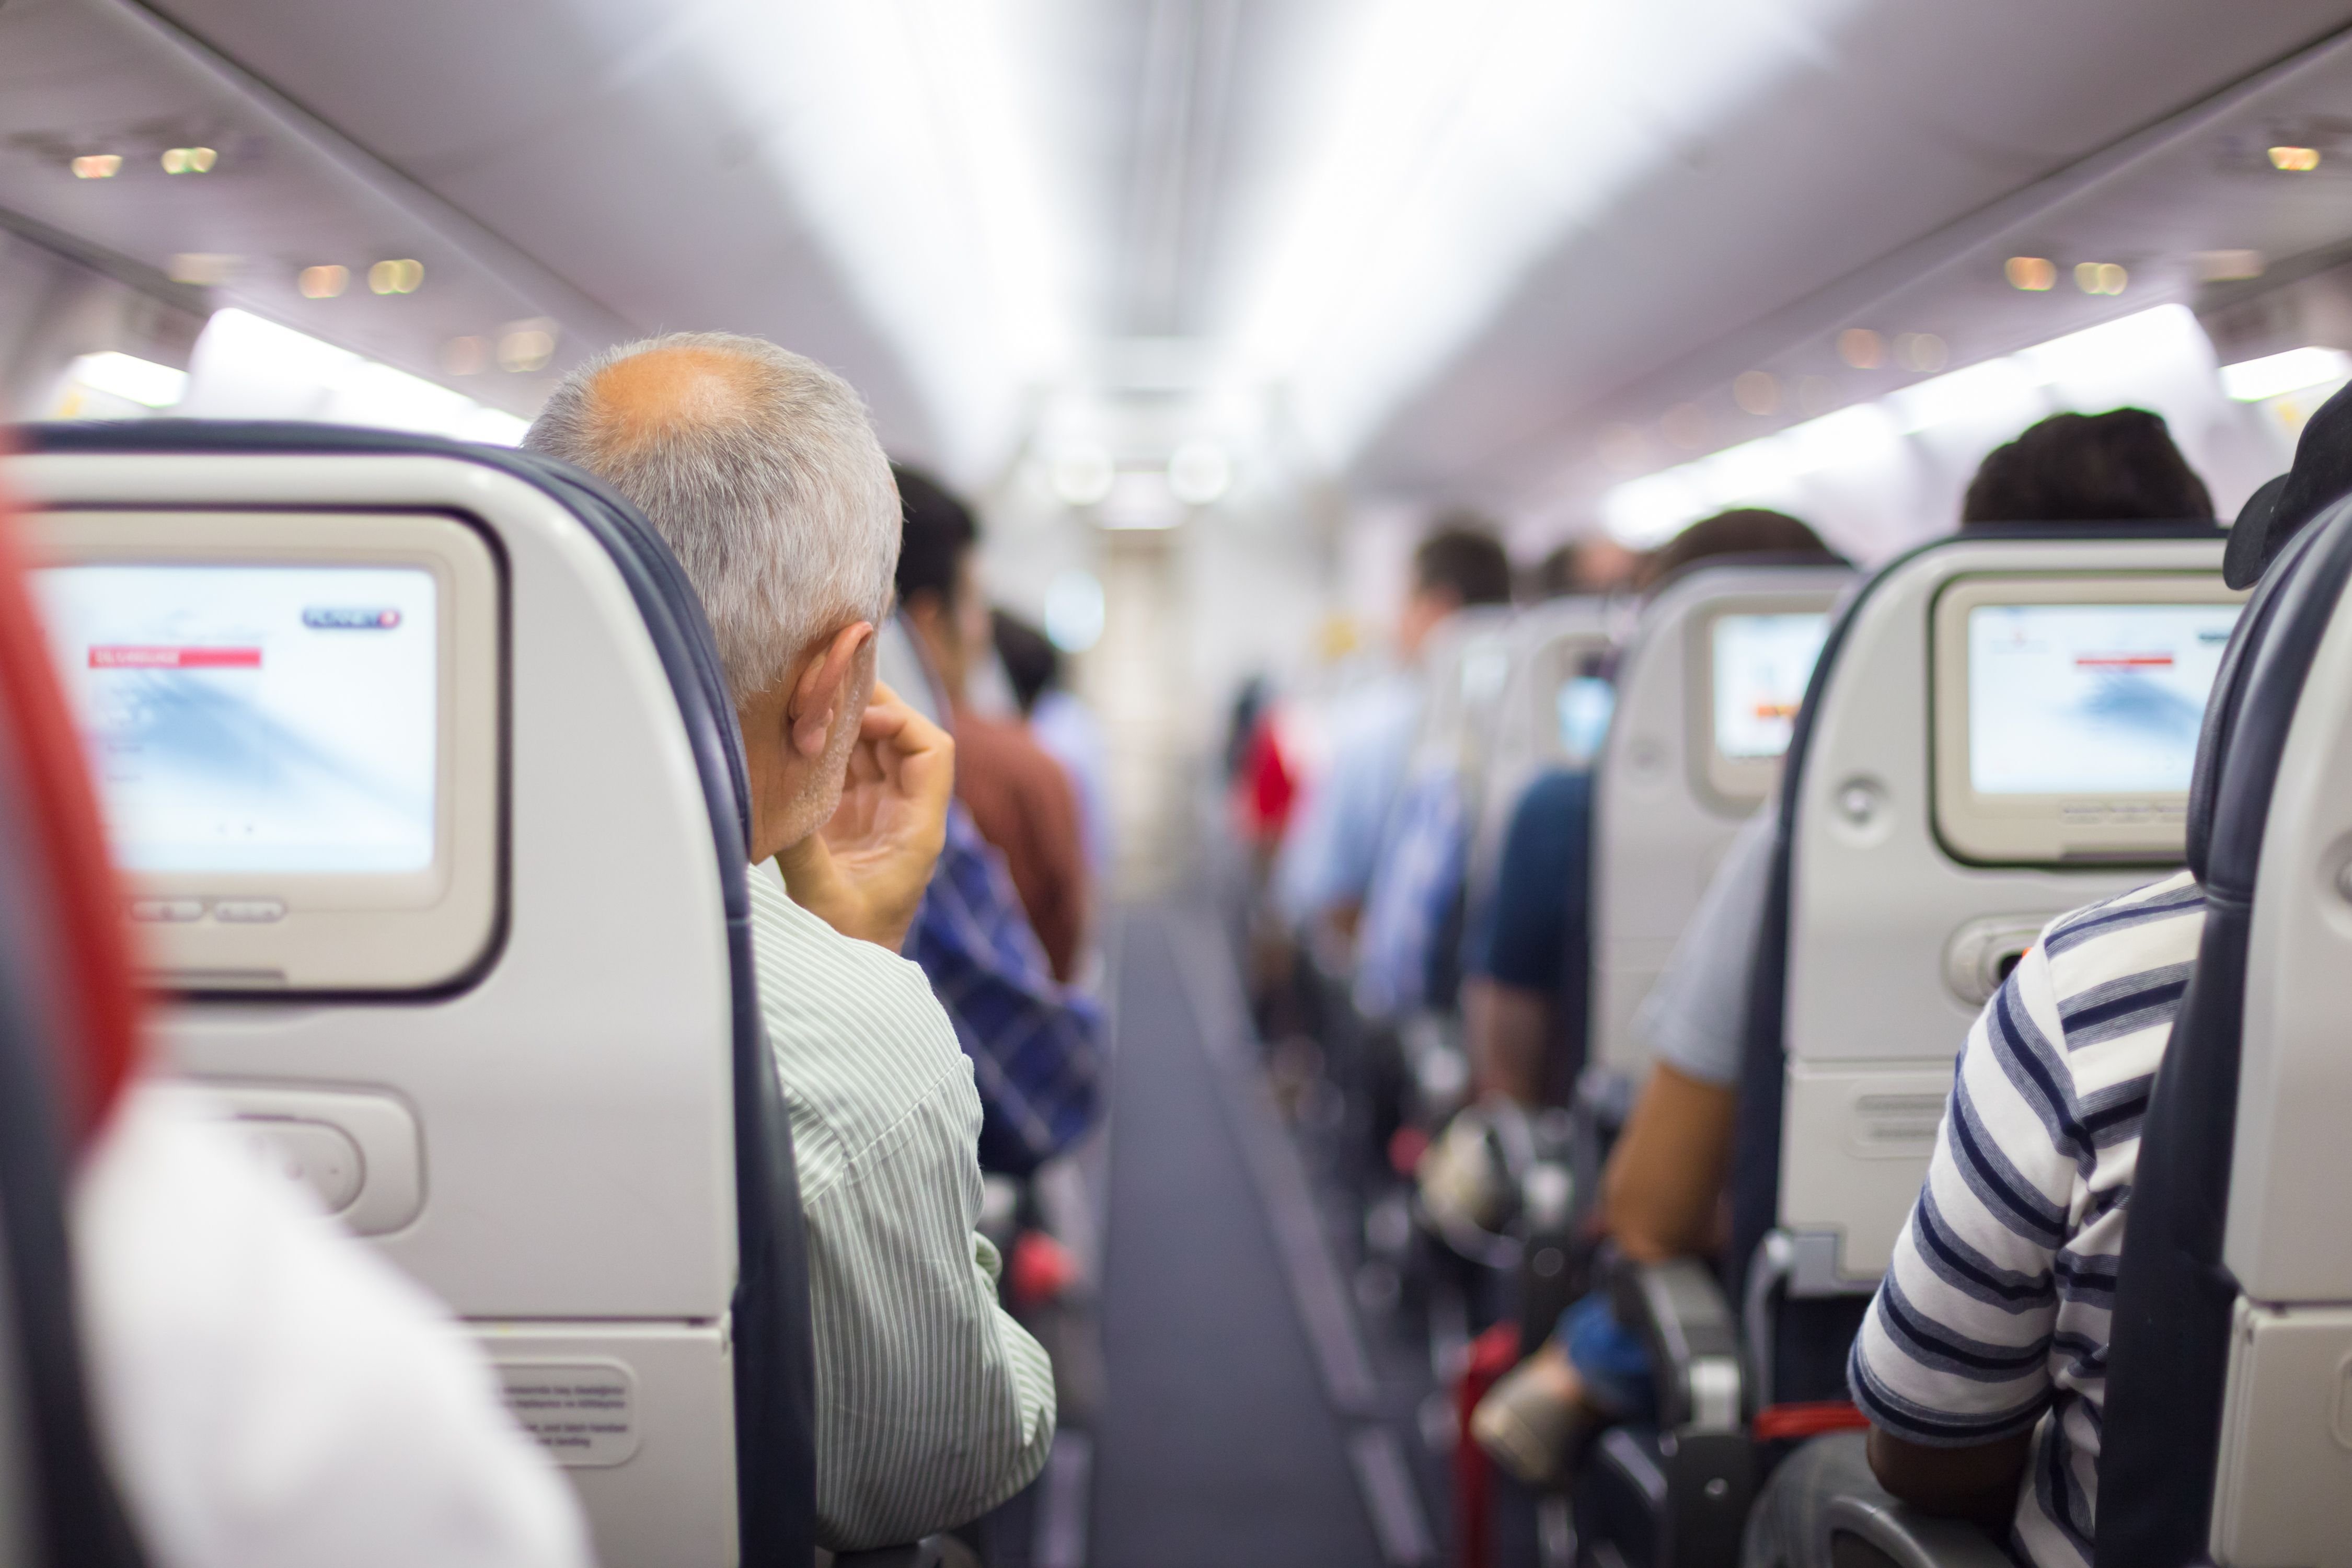 An airplane aisle taken from behind. | Source: Shutterstock